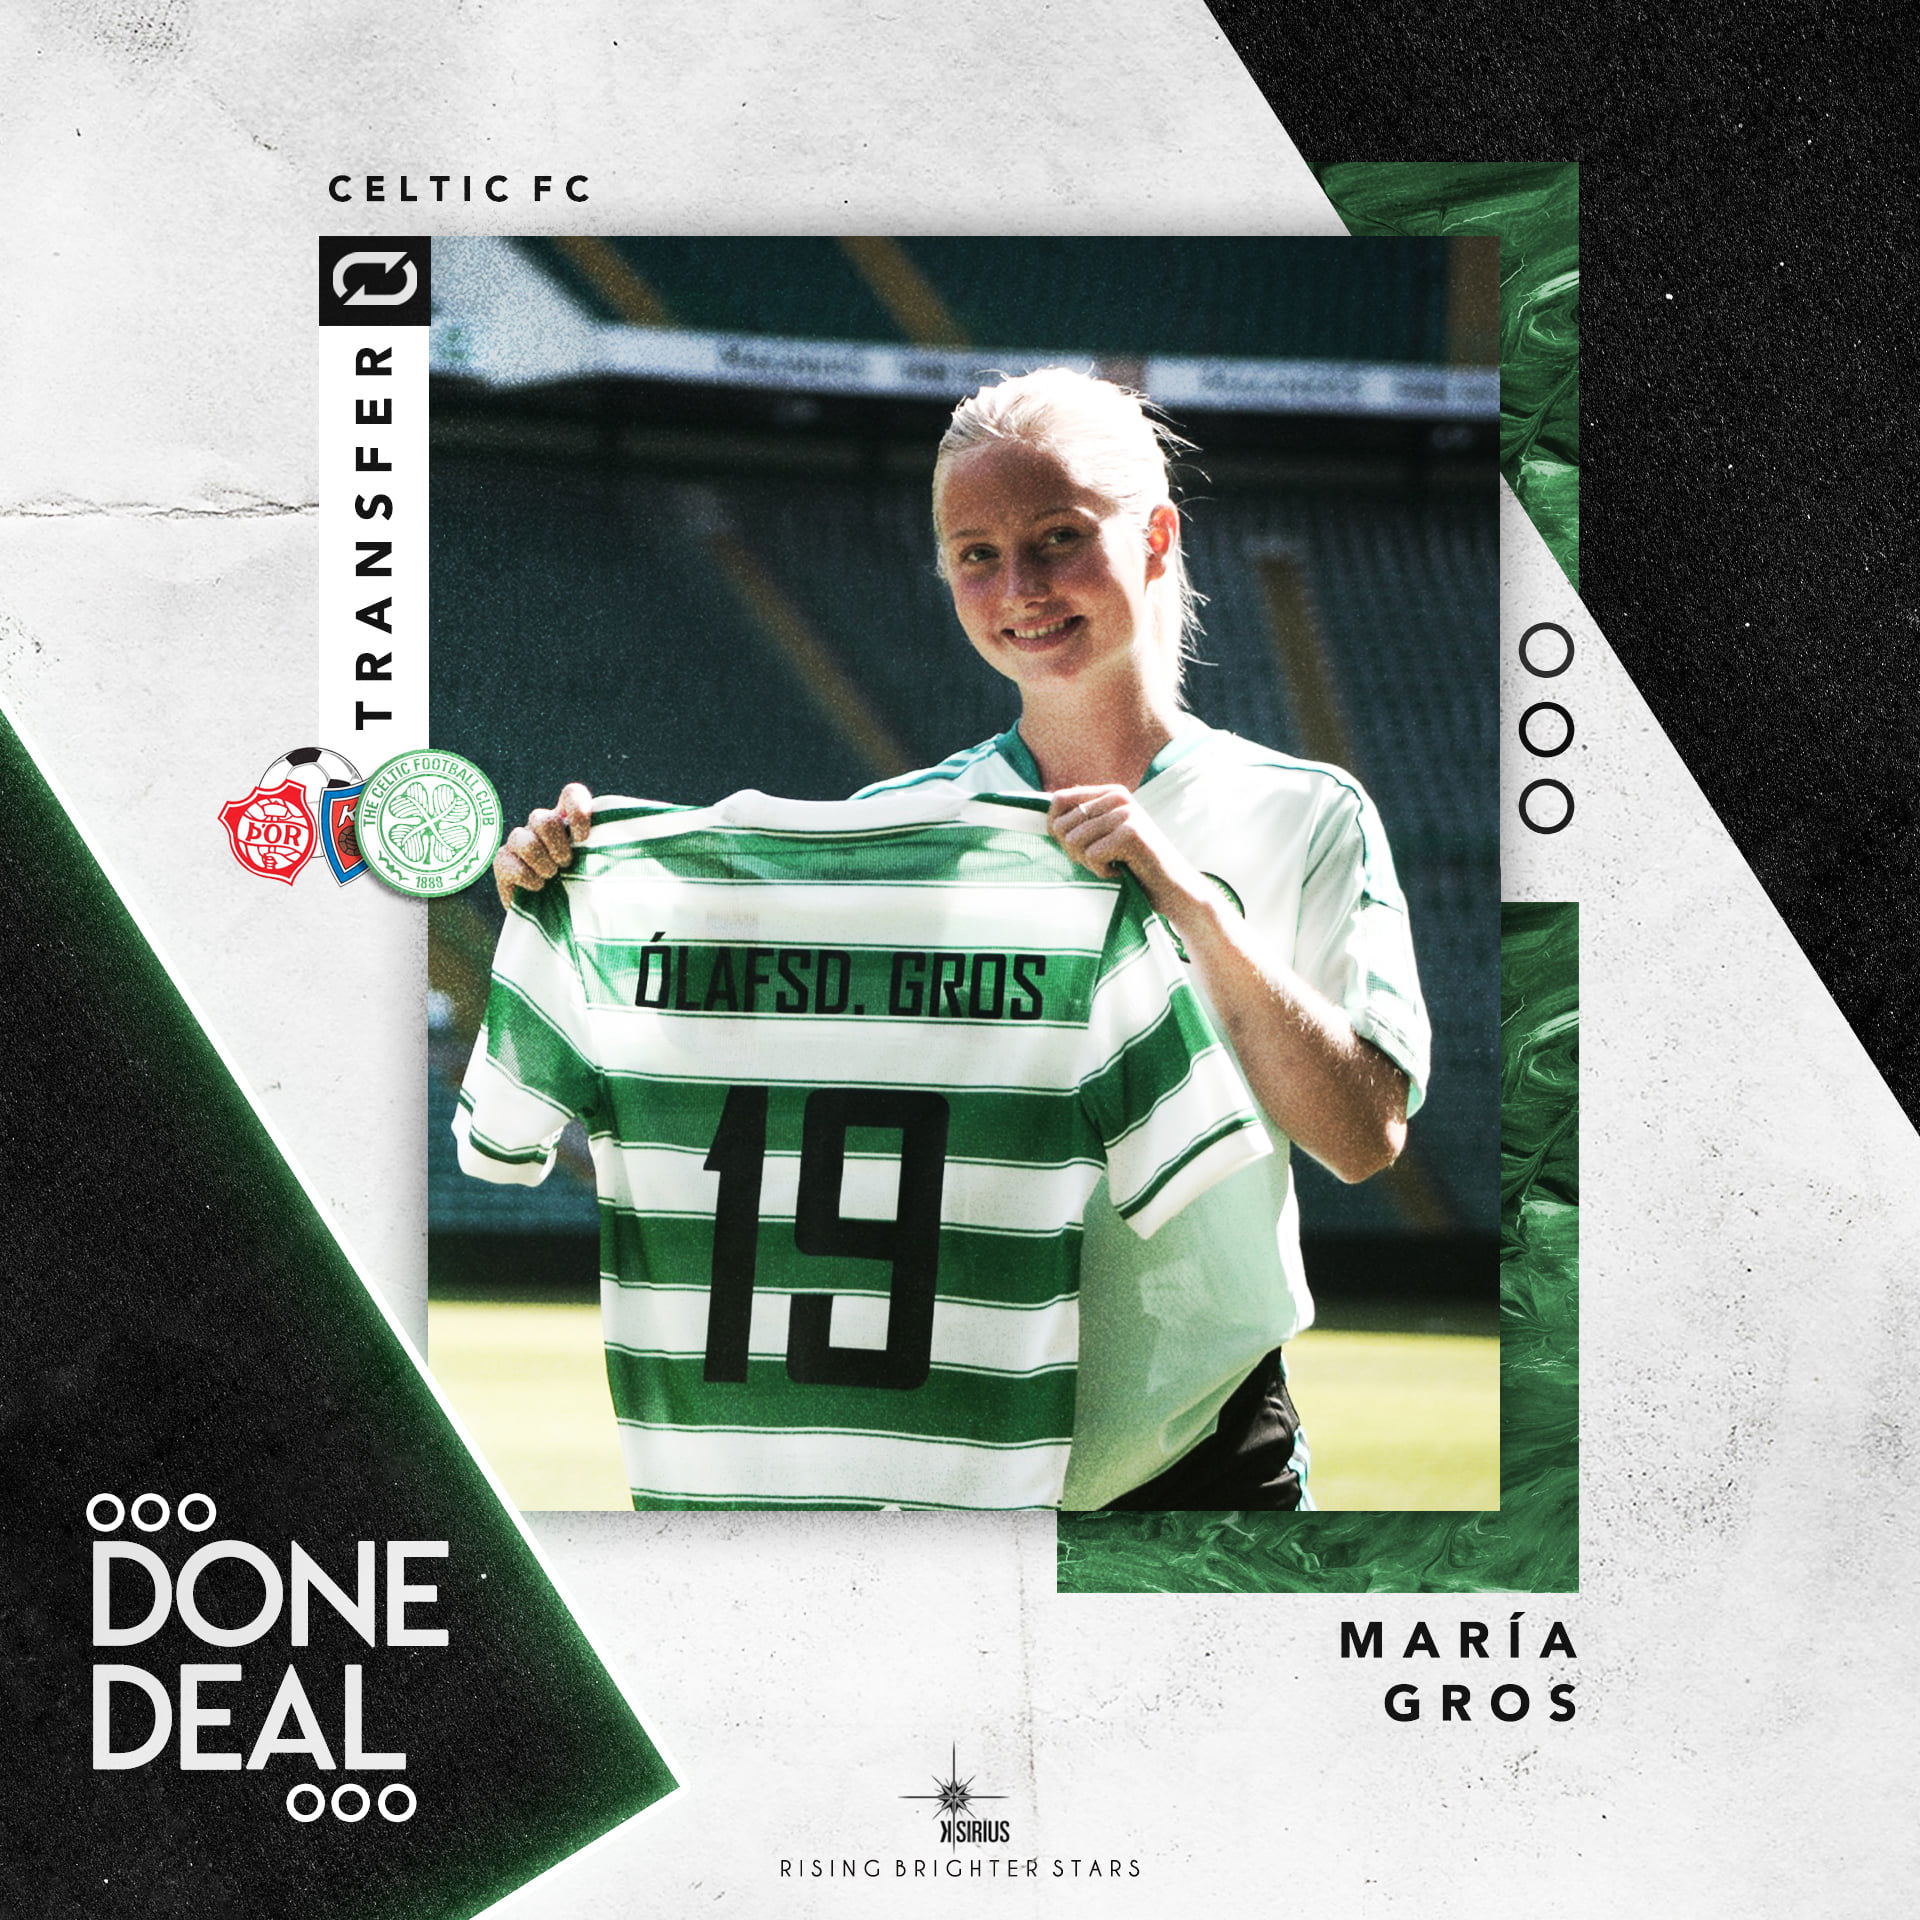 Signing: Maria Catharina Gros with Celtic F.C.